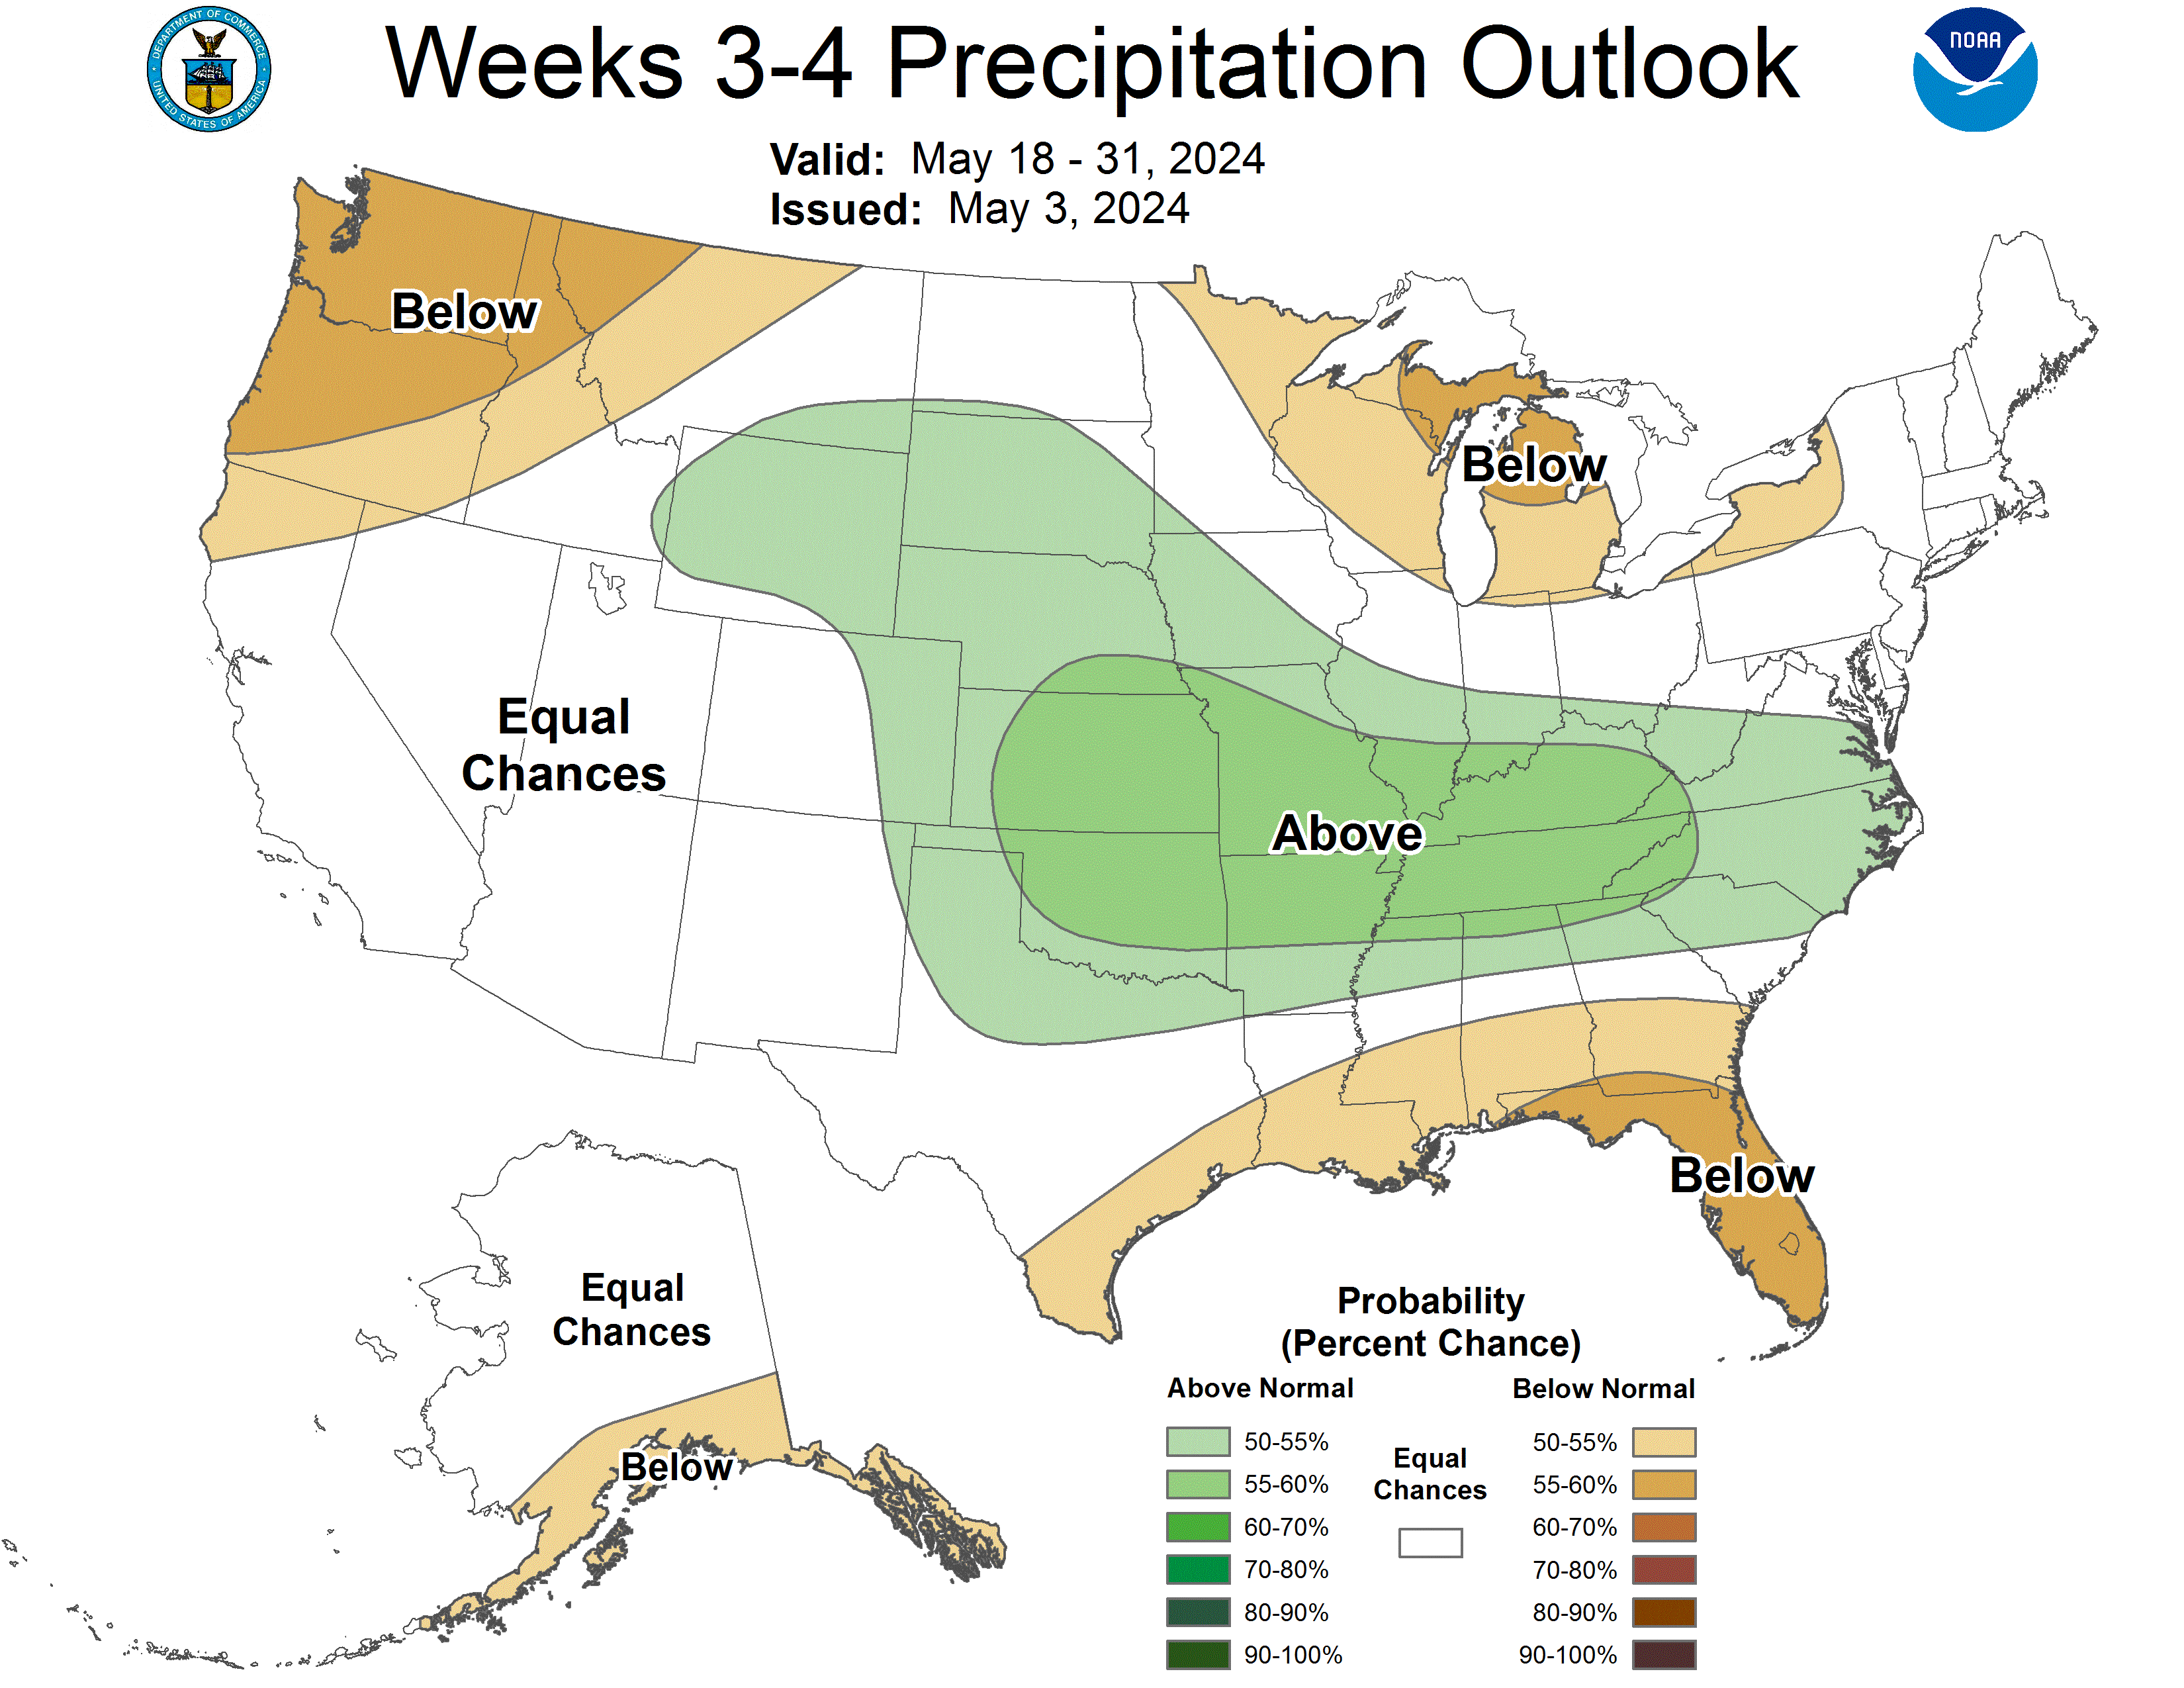 https://www.cpc.ncep.noaa.gov/products/predictions/WK34/gifs/WK34prcp.gif